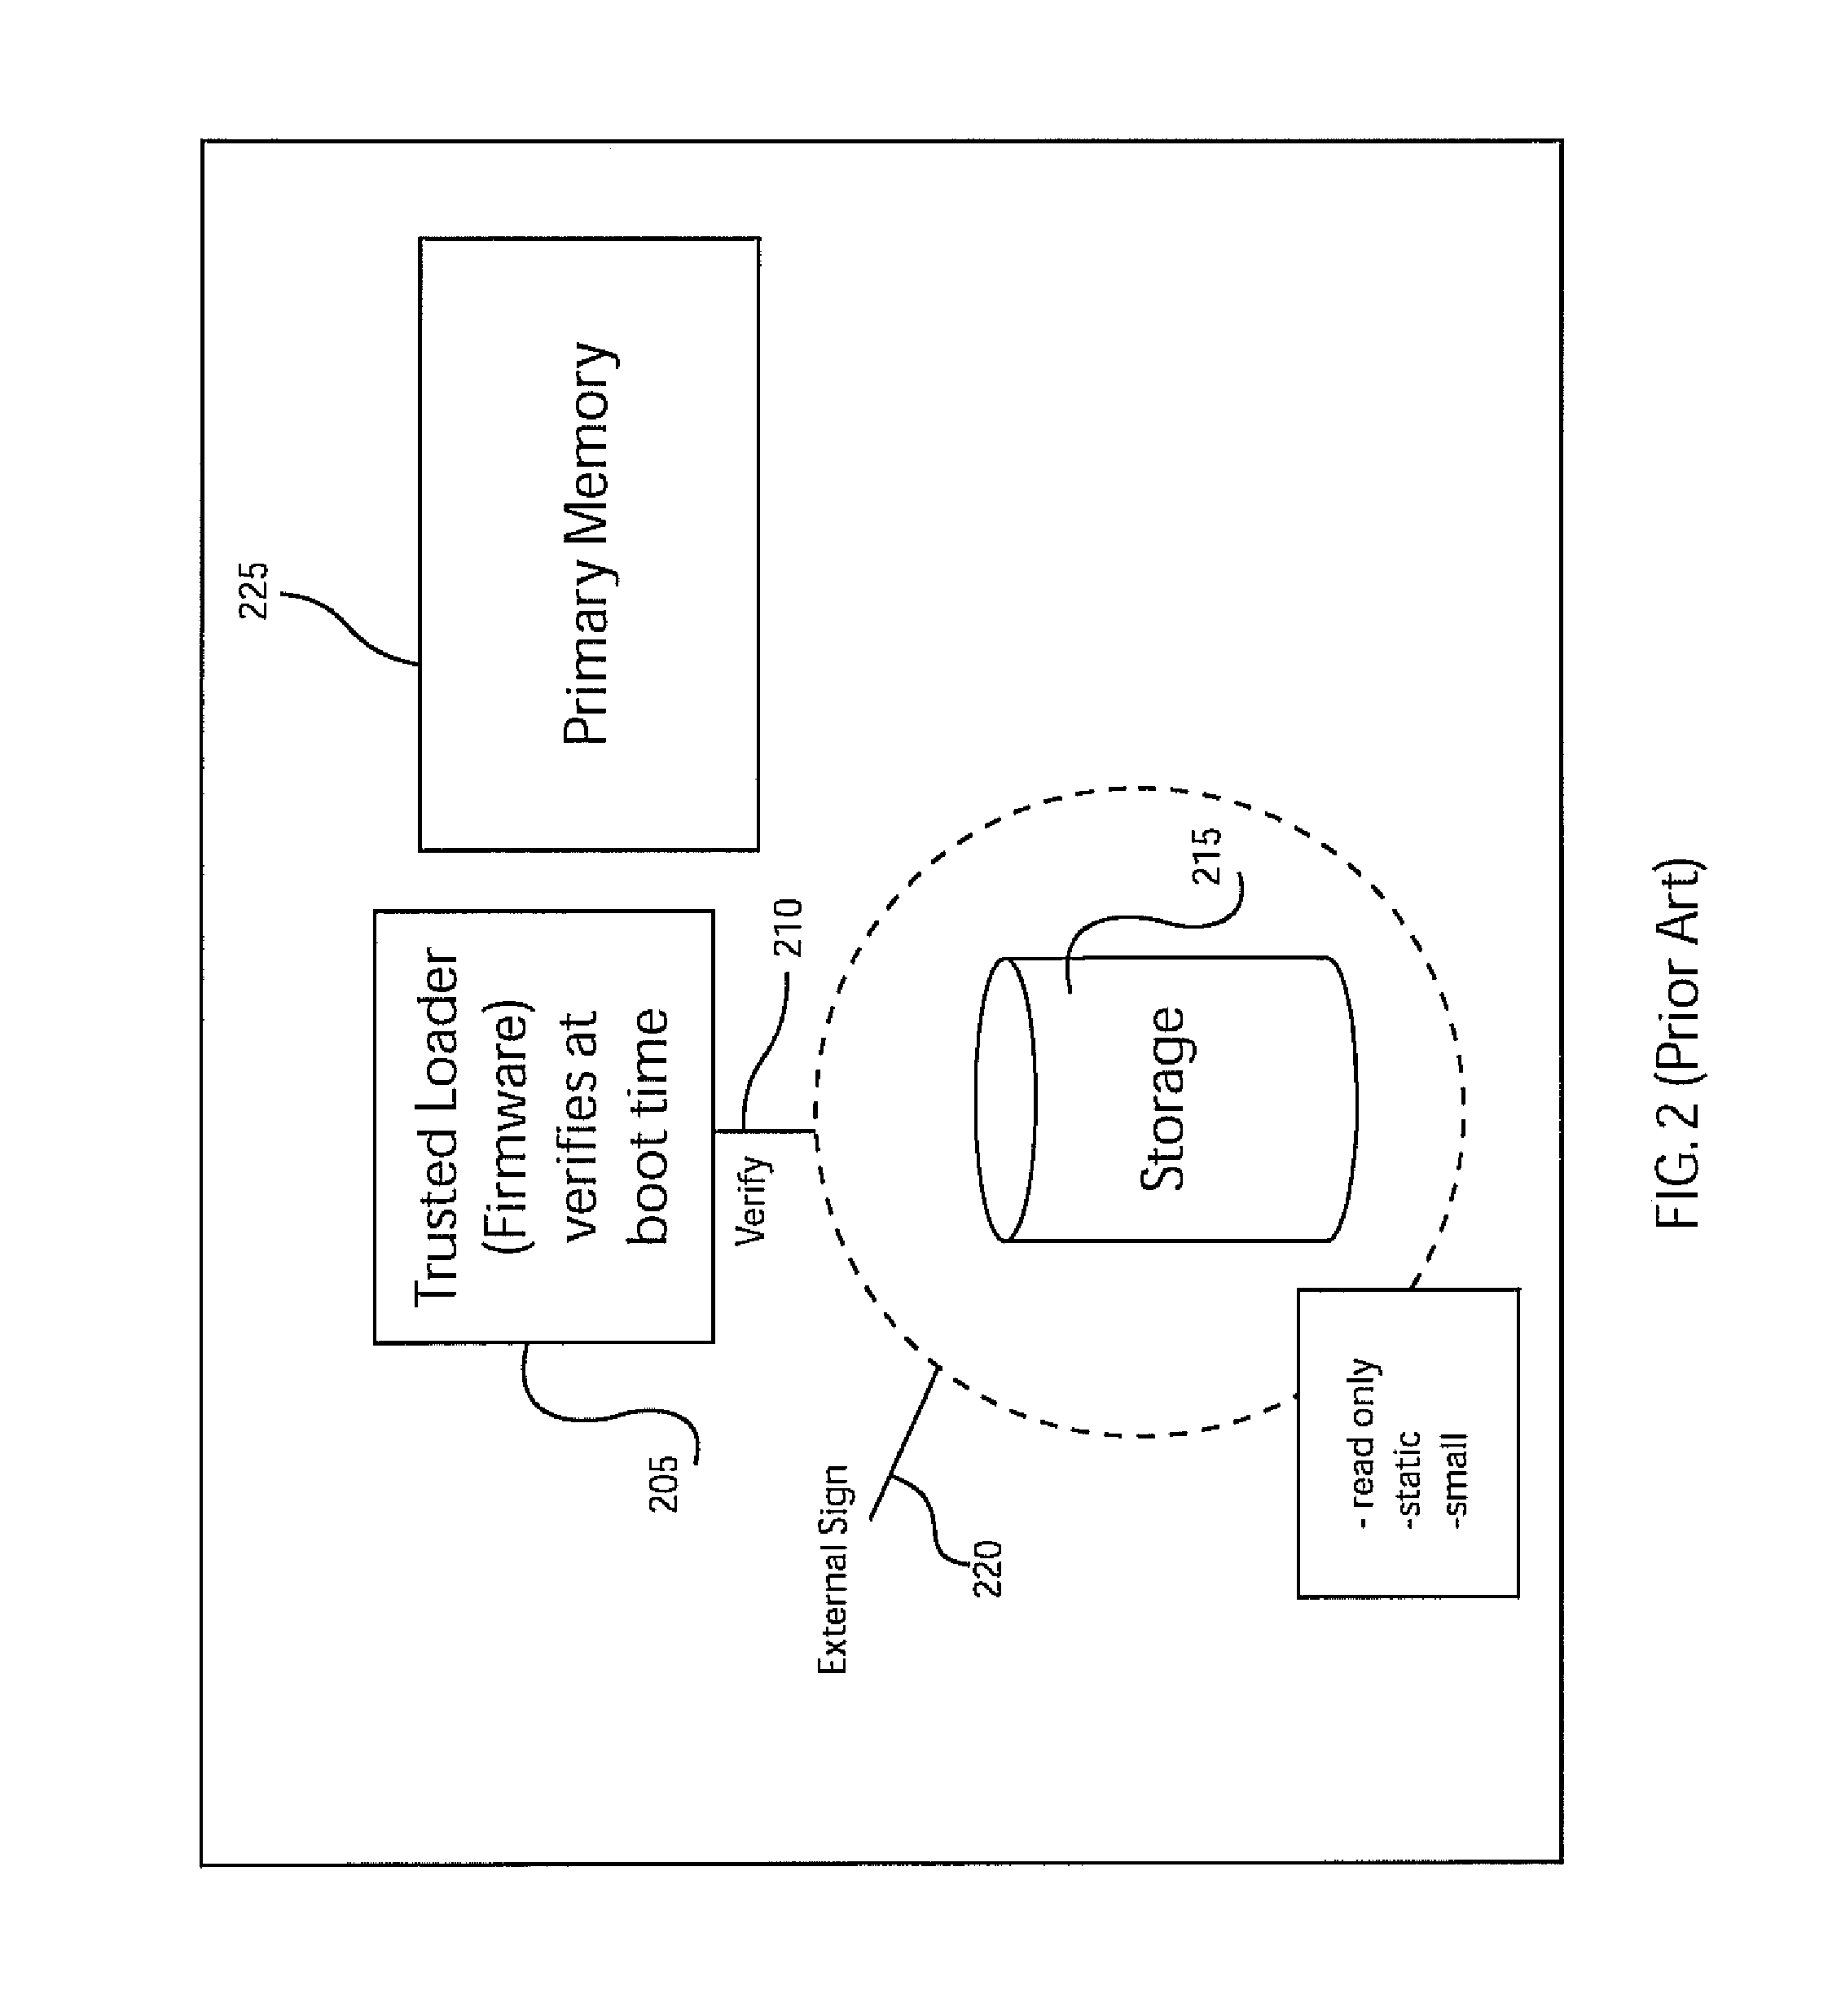 Method and system for measuring status and state of remotely executing programs